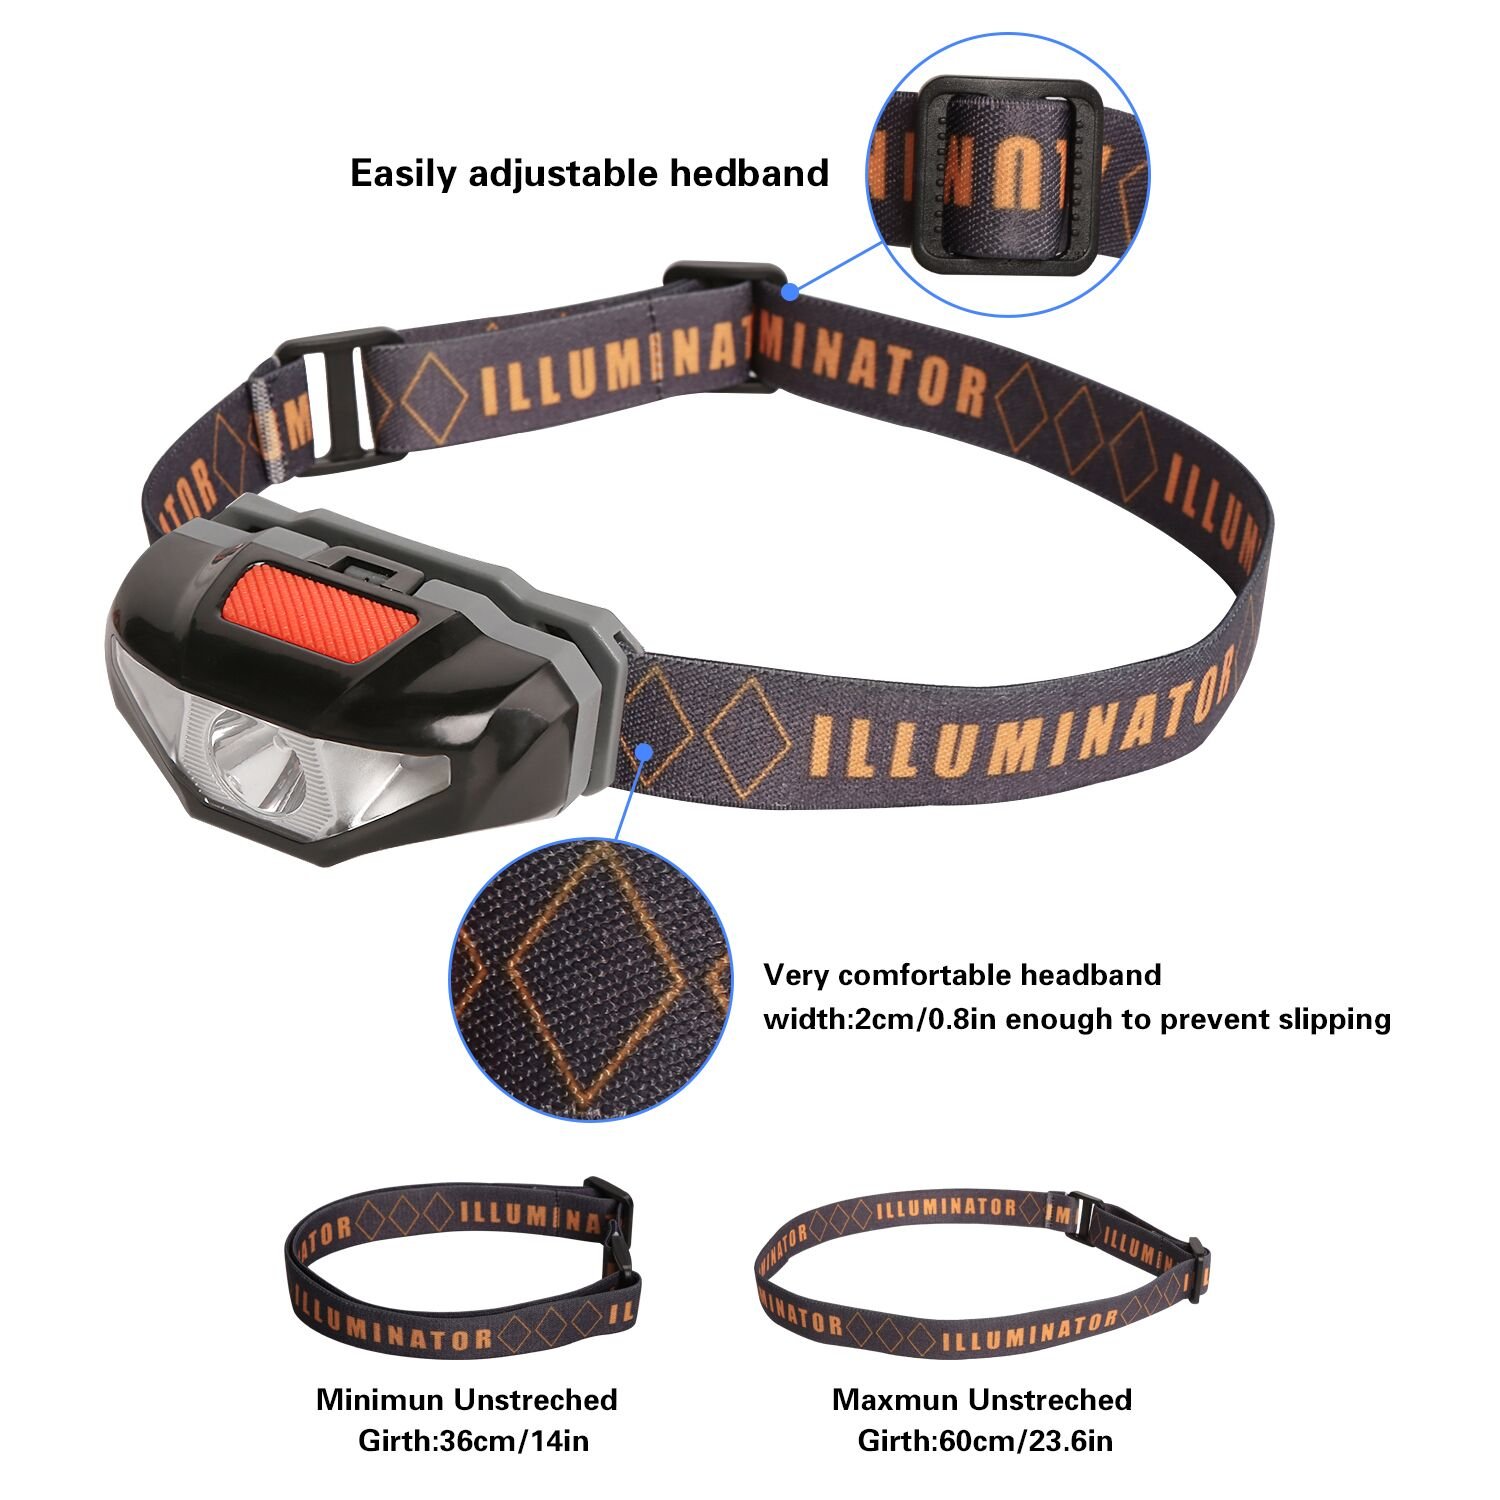 COSOOS Mini LED Headlamp Flashlight with Carrying Case, 1.6oz Lightweight Small Head Lamp Waterproof Running Headlamp, Bright Headlight for Adults, Kids, Camping, Reading (NO AA Battery)